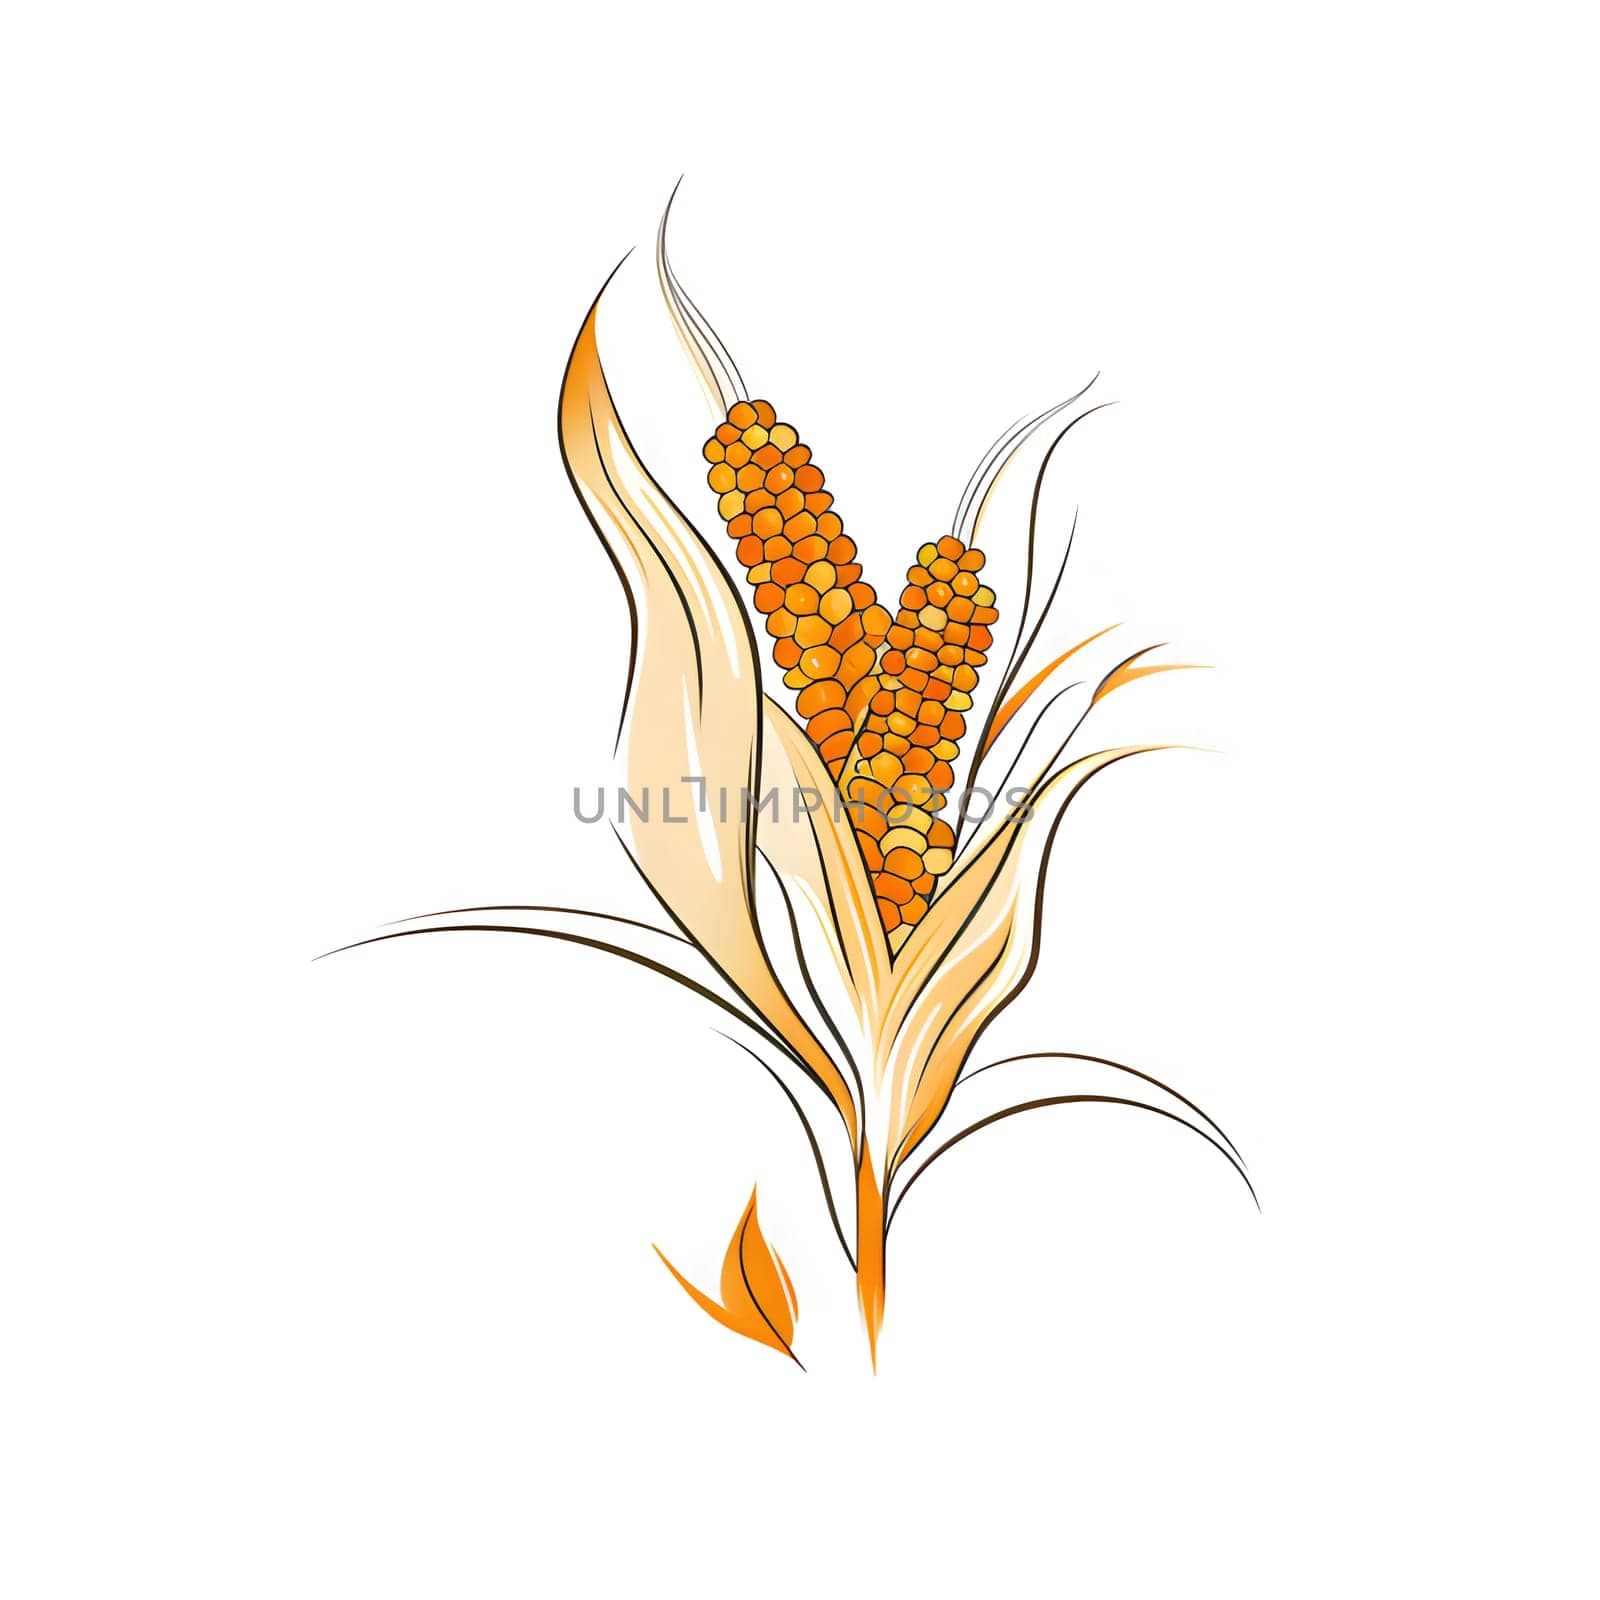 Modern logo leaves with two corn cobs isolated on white background. Corn as a dish of thanksgiving for the harvest. An atmosphere of joy and celebration.